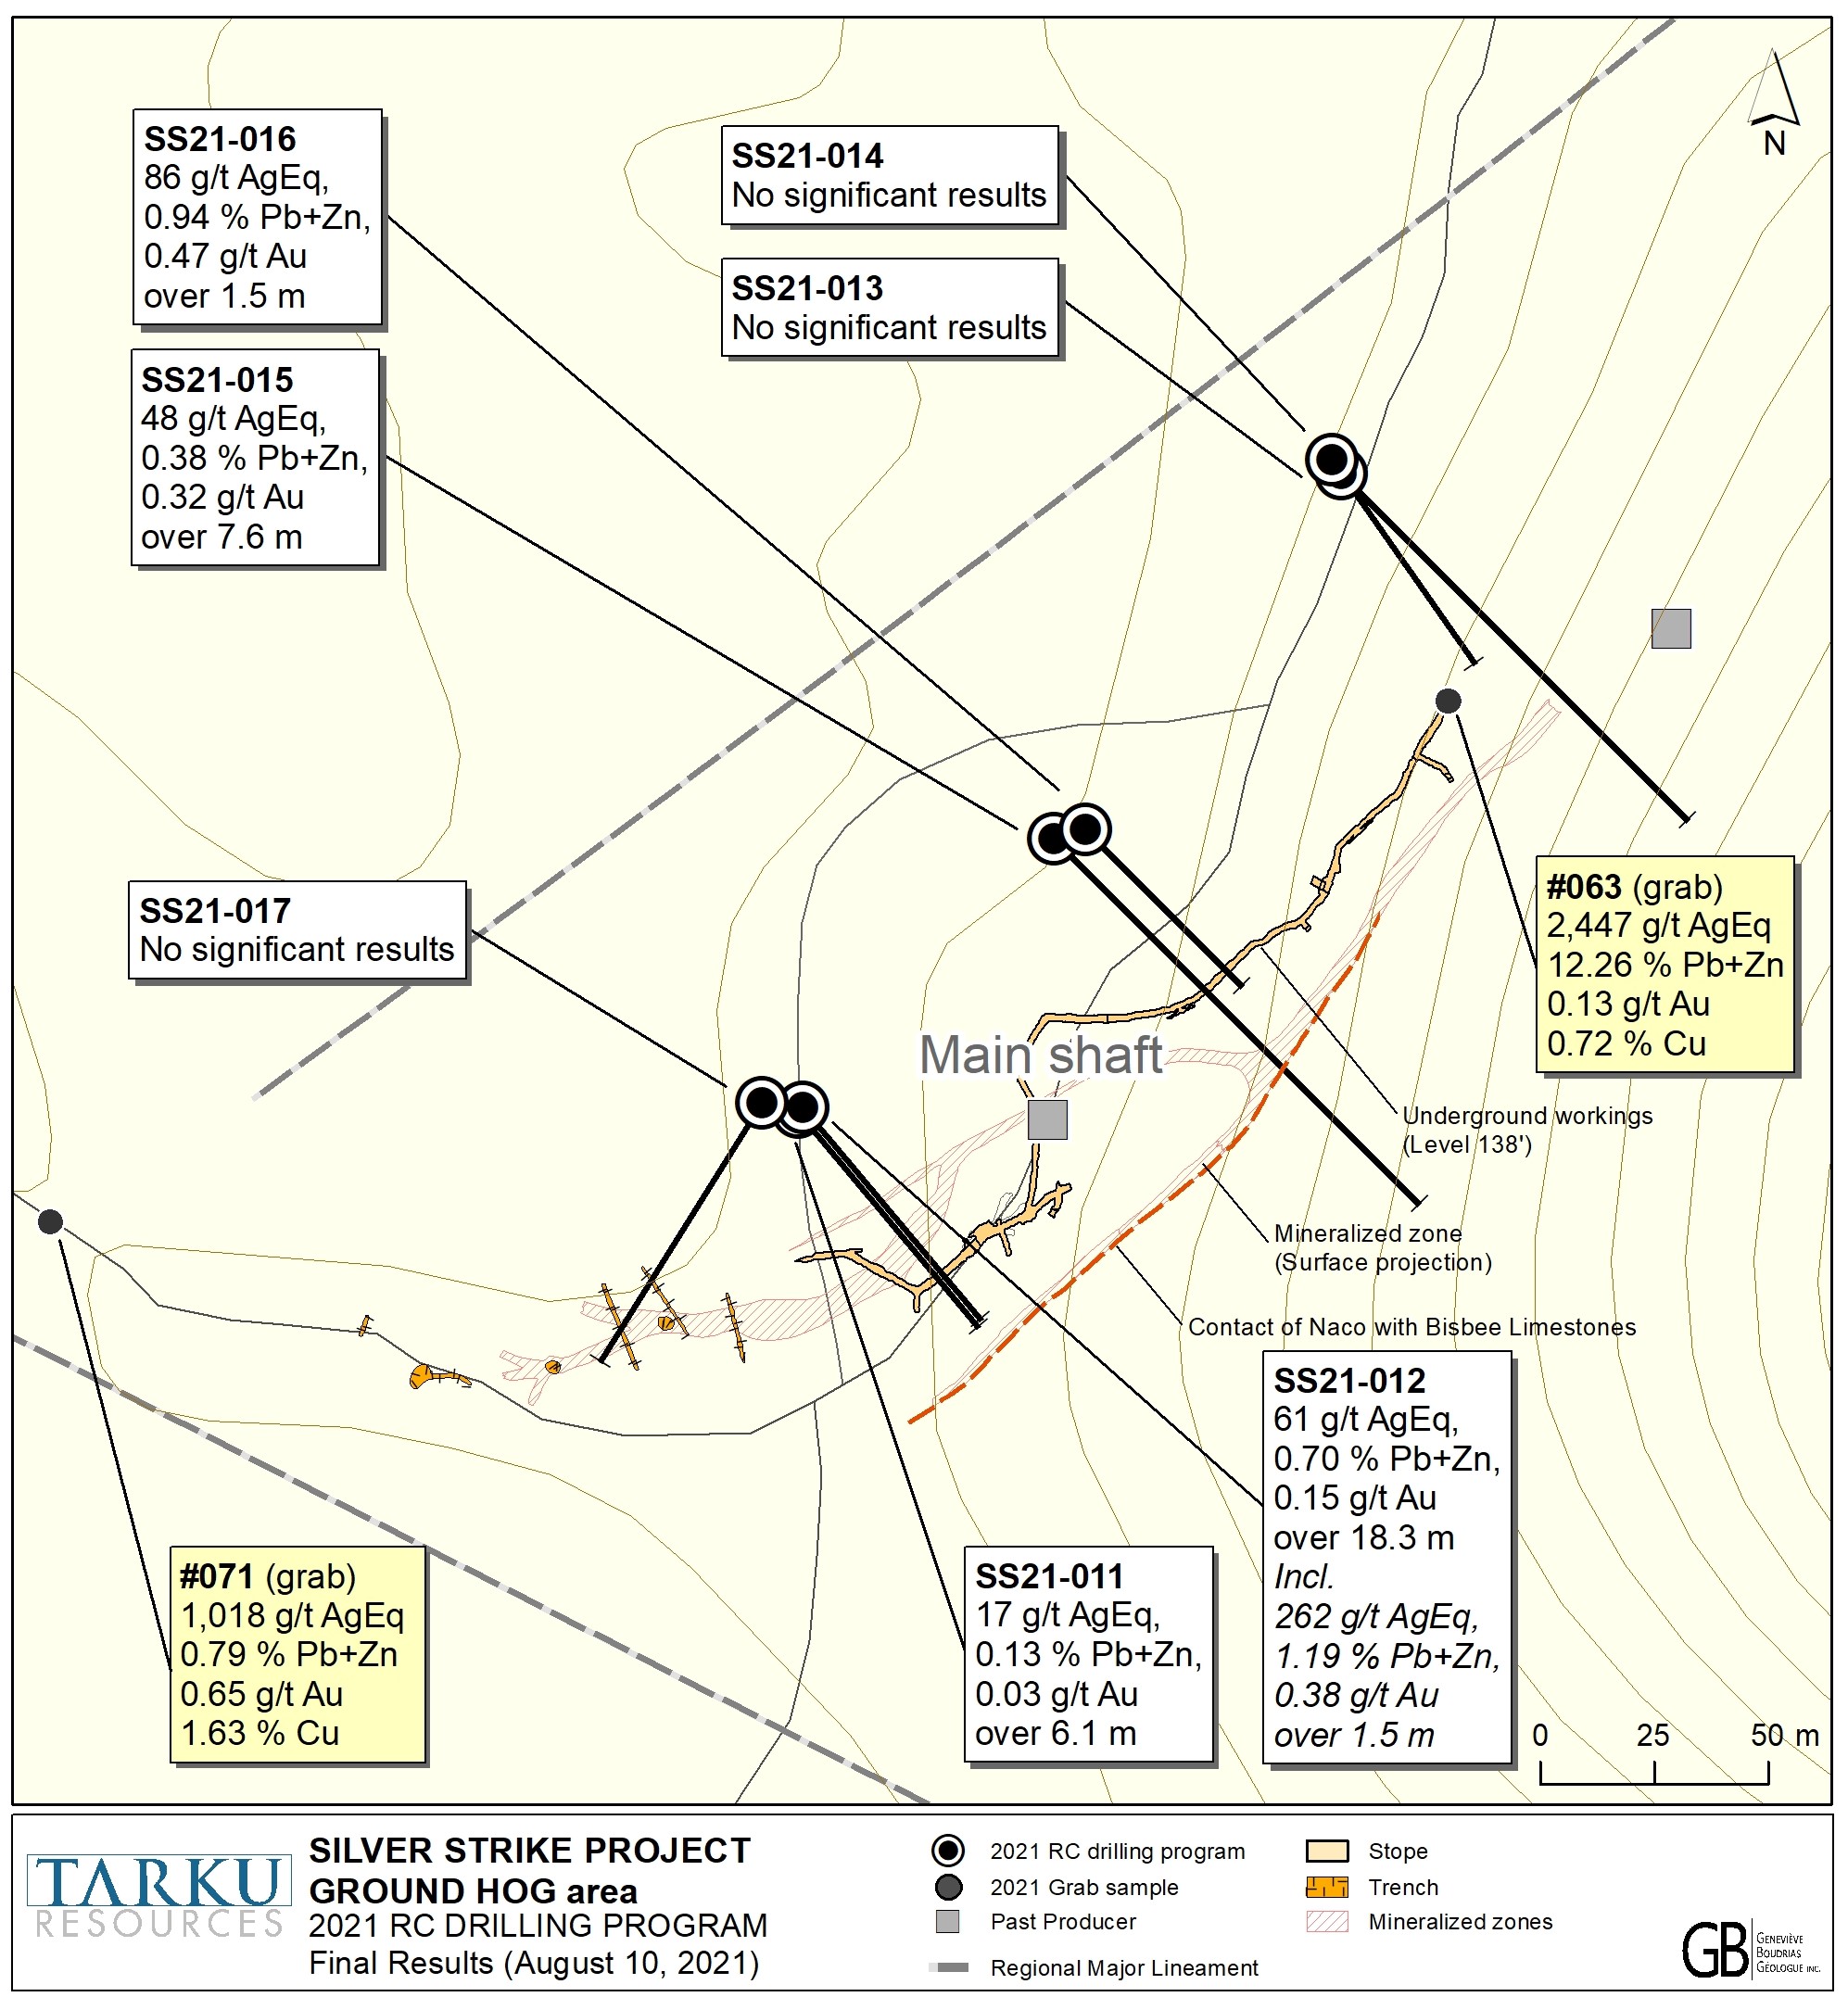 Tarku Resources ltd, Tuesday, August 10, 2021, Press release picture